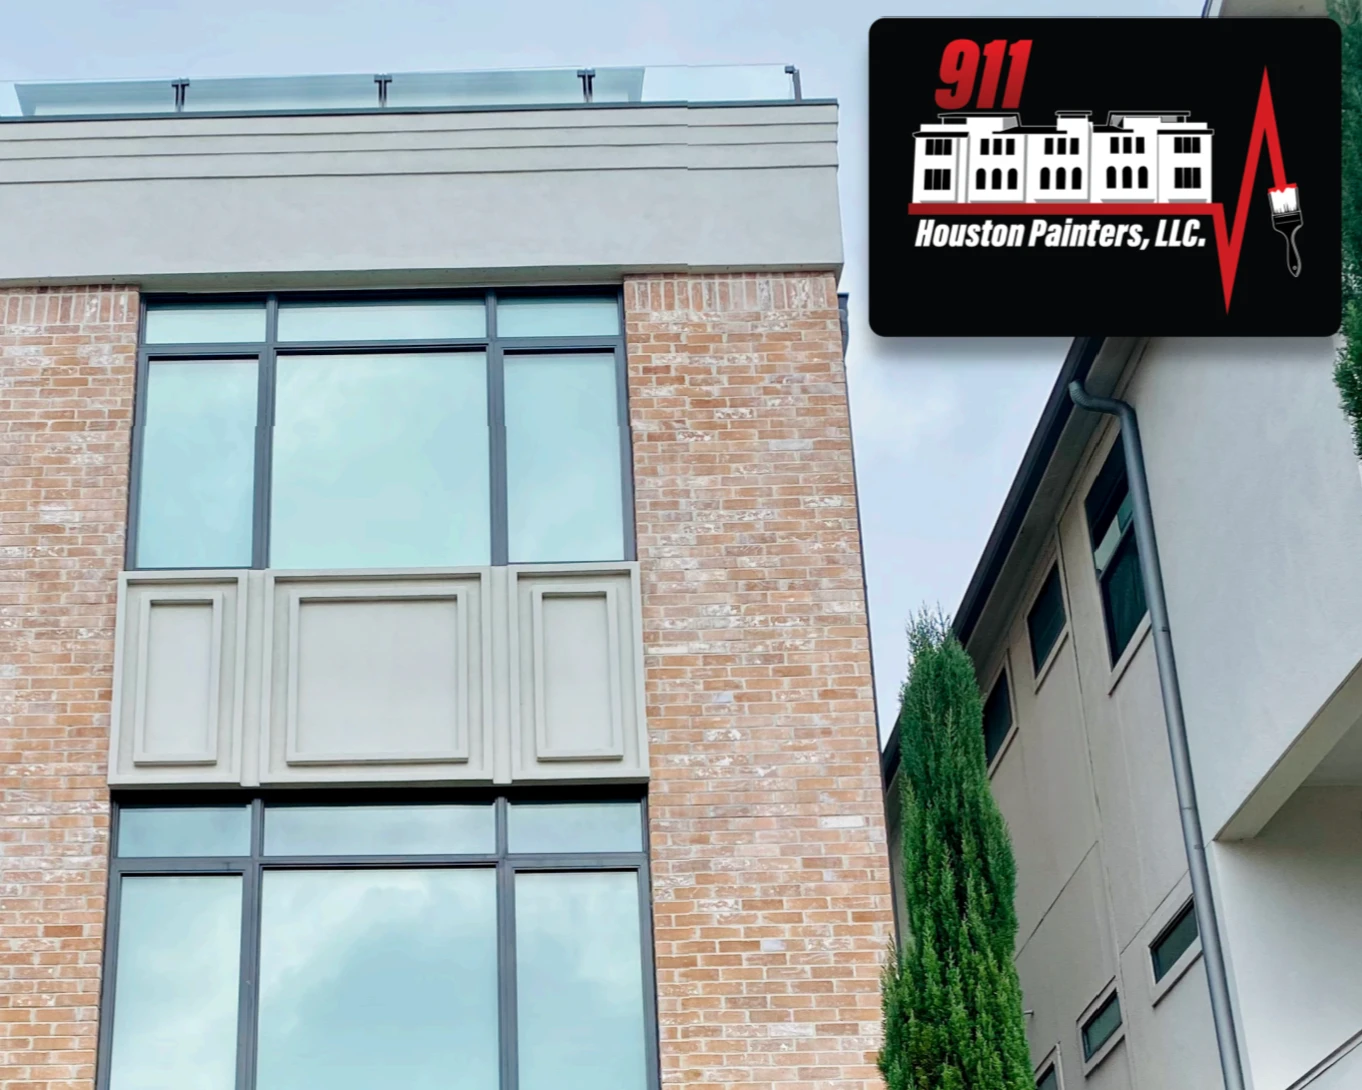 Exterior Painting for 911 Houston Painters, LLC in Houston, TX